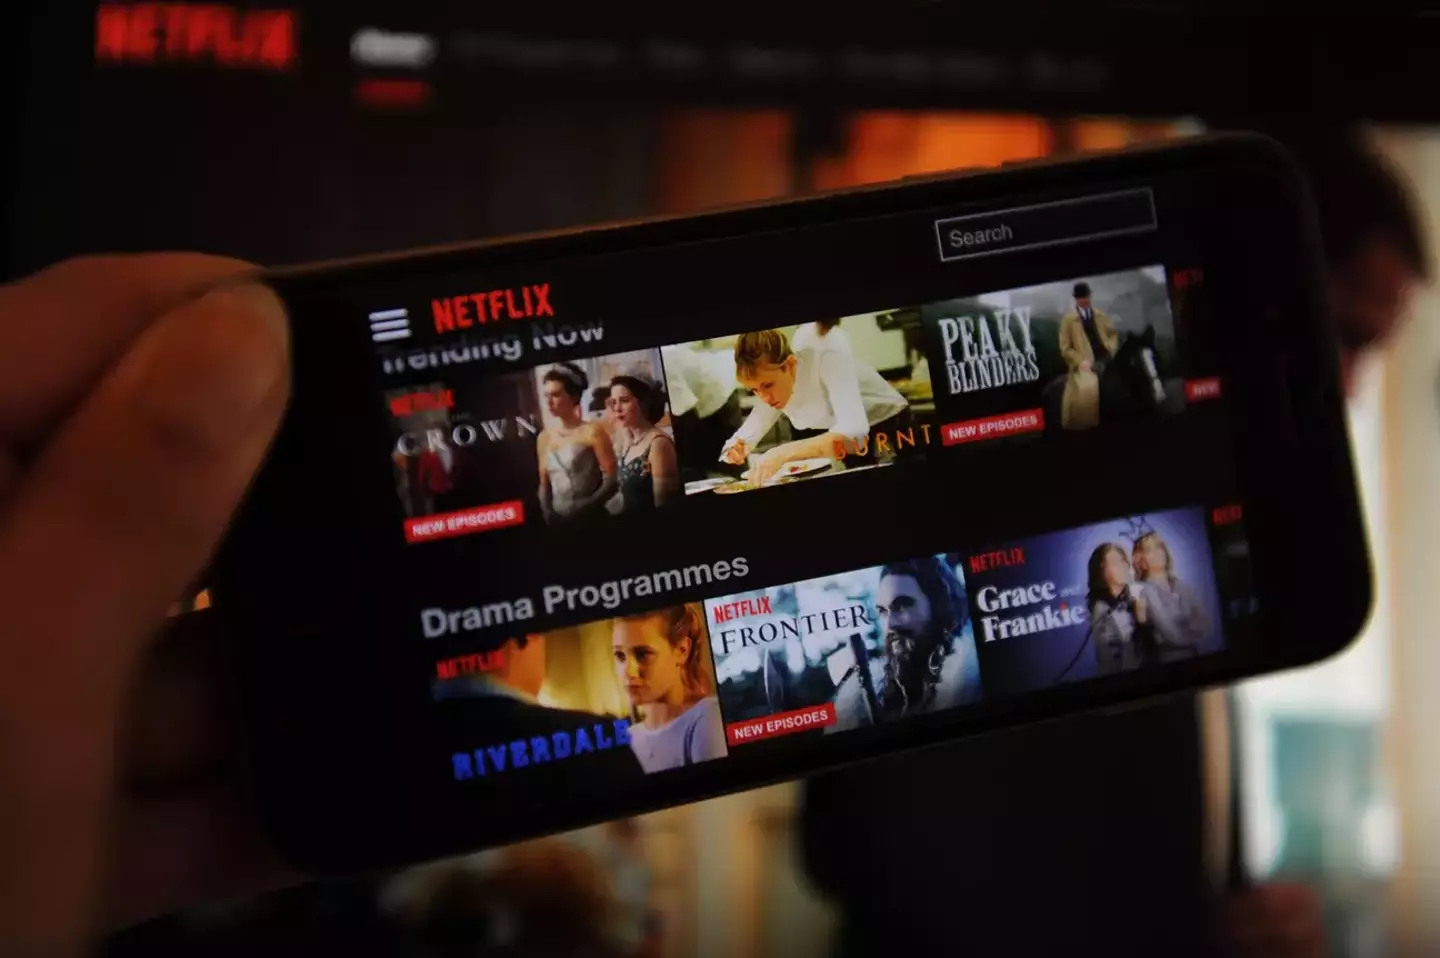 Are you going to have to set up your own Netflix account for the first time?